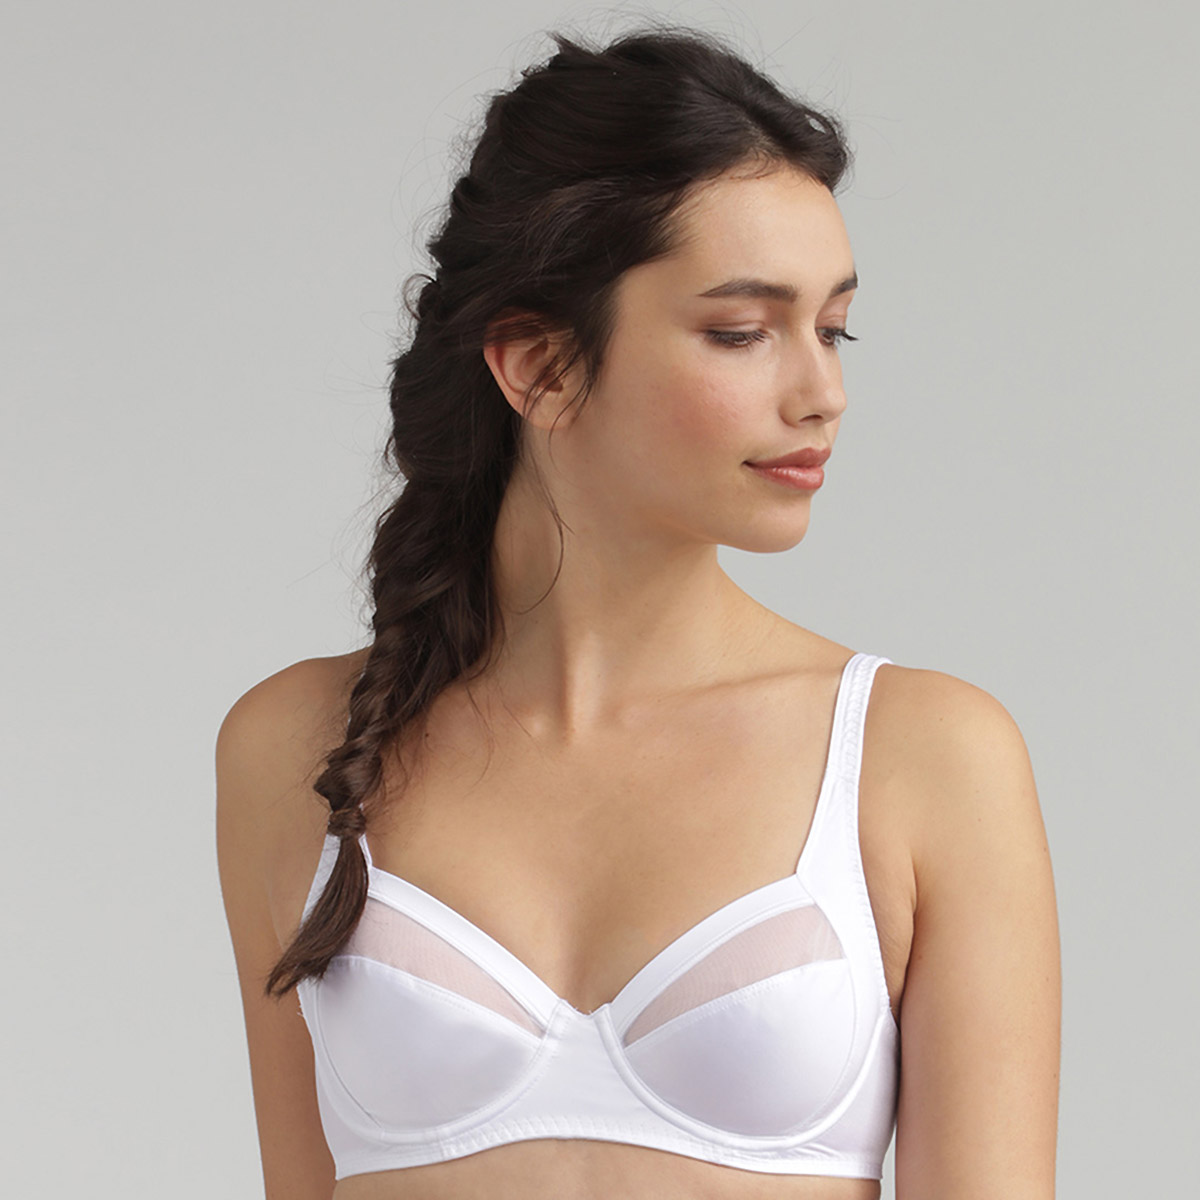 Soutien-gorge emboîtant tulle blanc Perfect Silhouette, , PLAYTEX